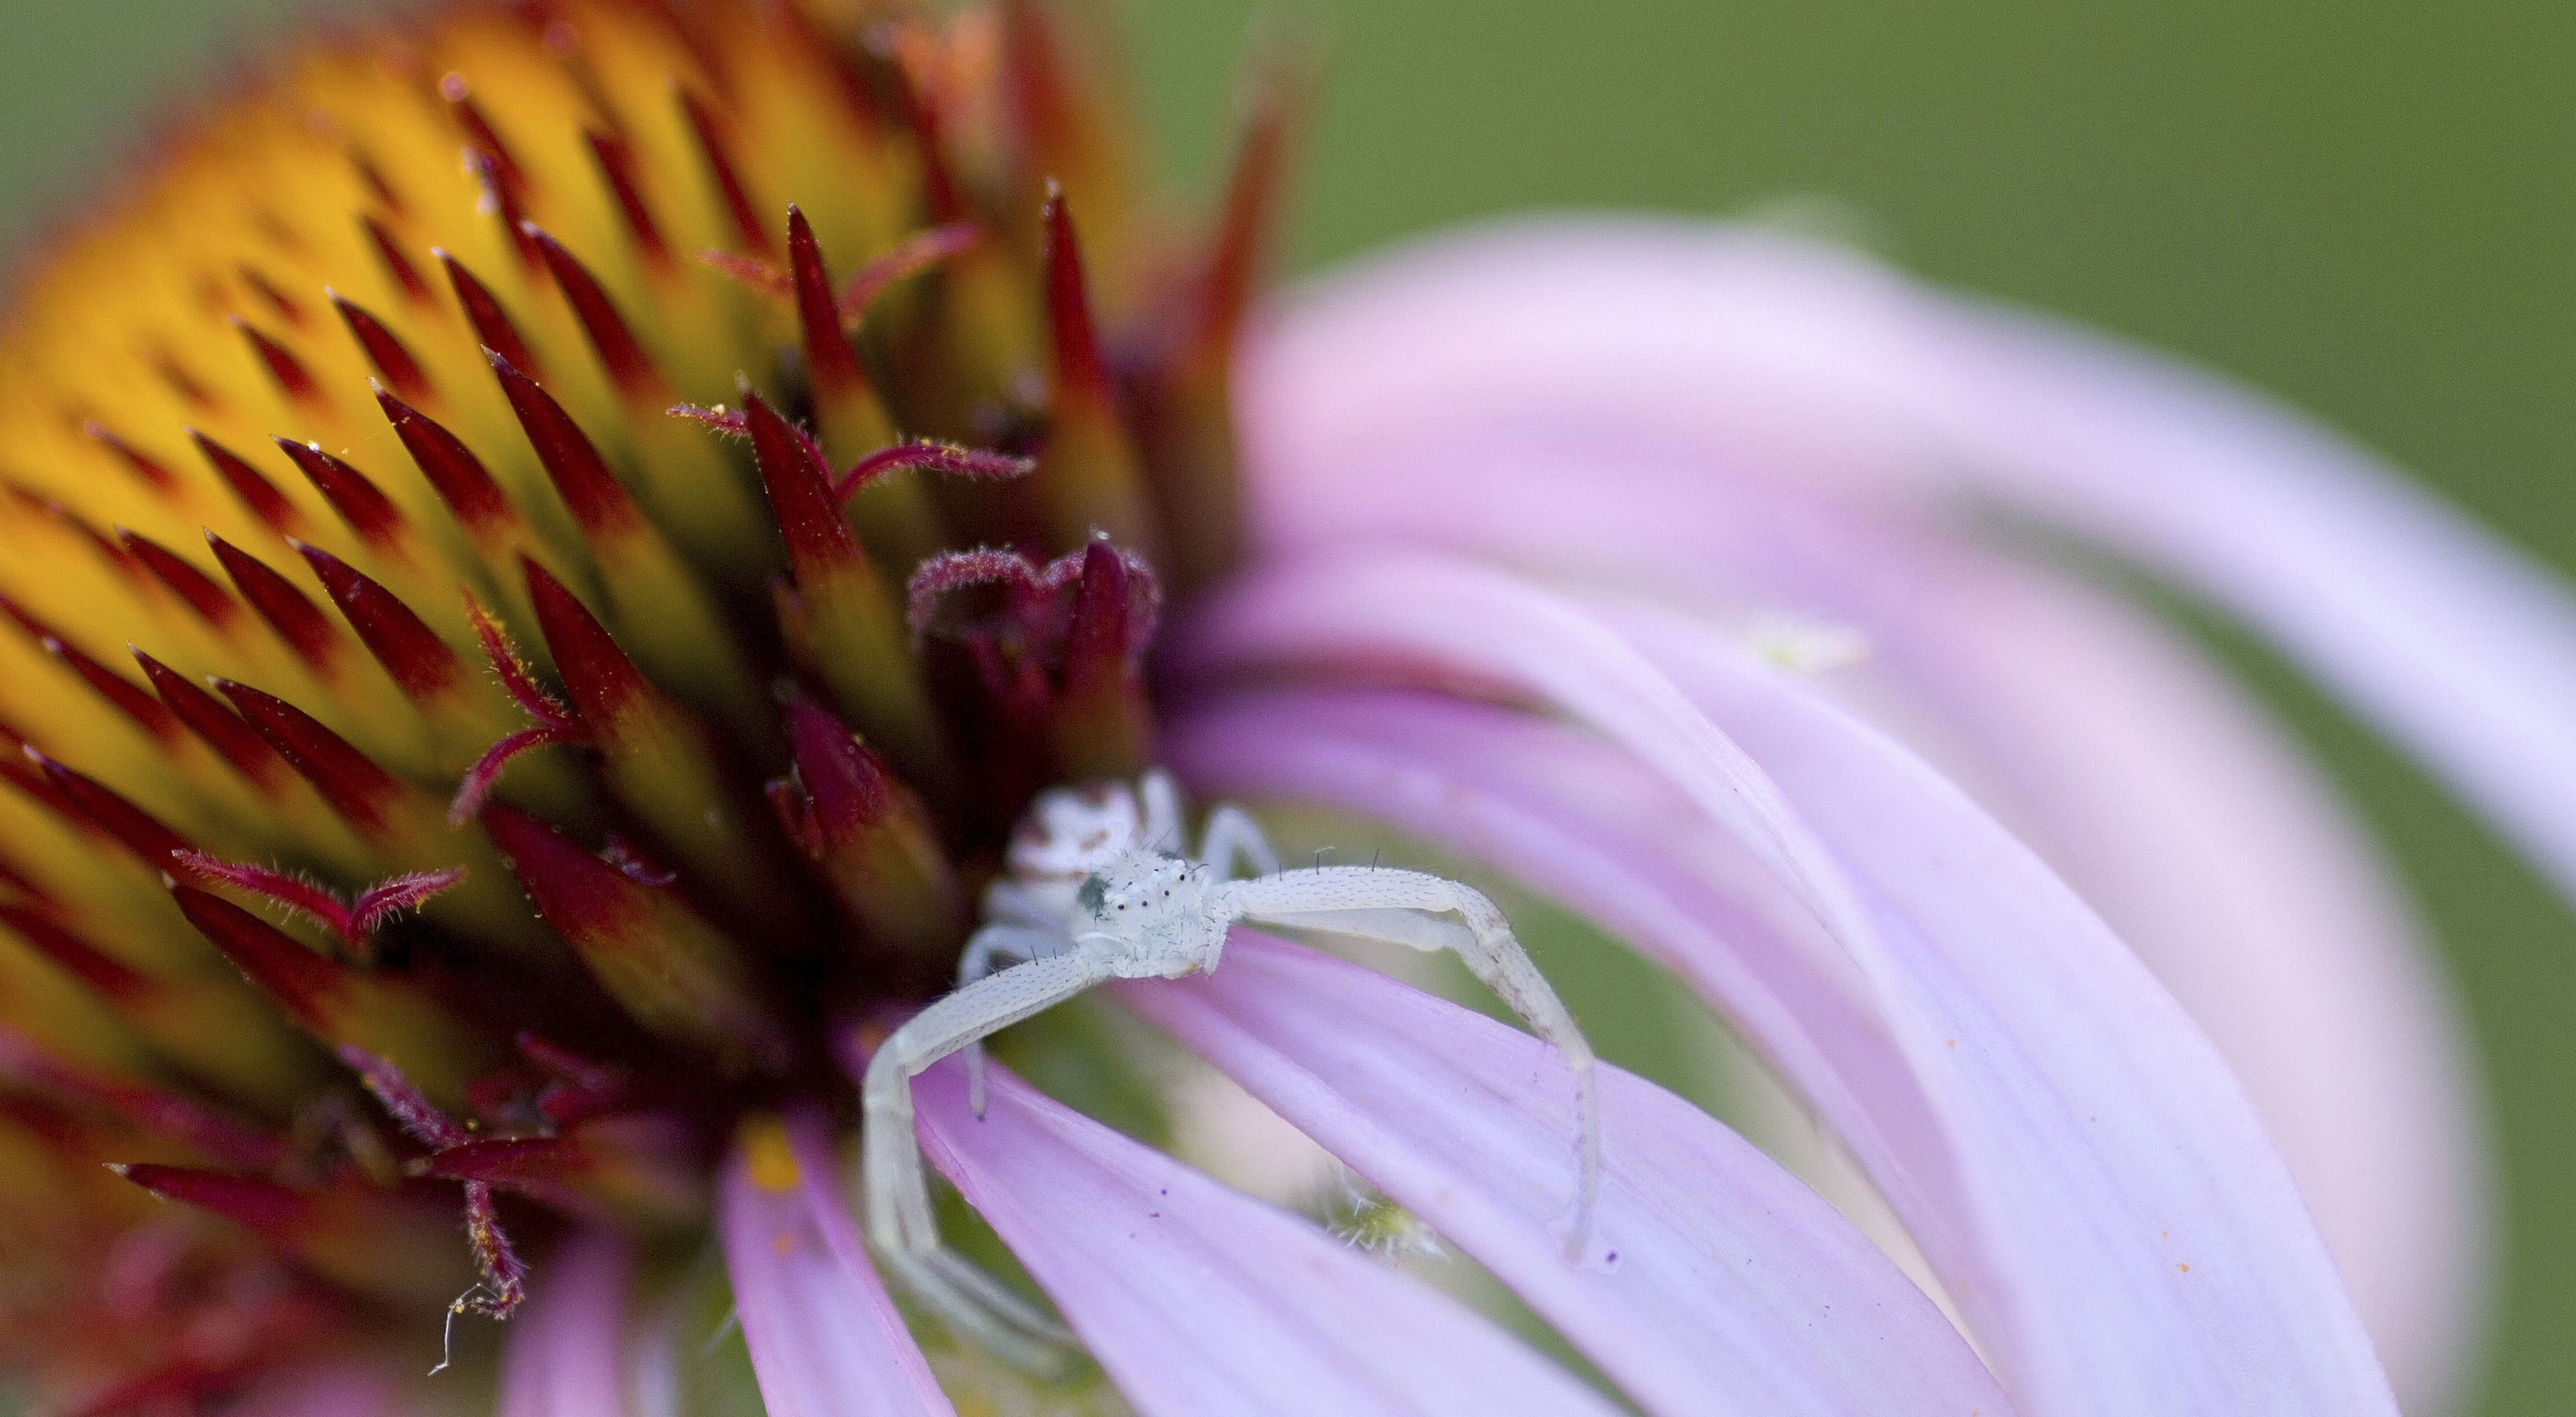 A small, translucent white spider sits on the thin petal of a purple coneflower.